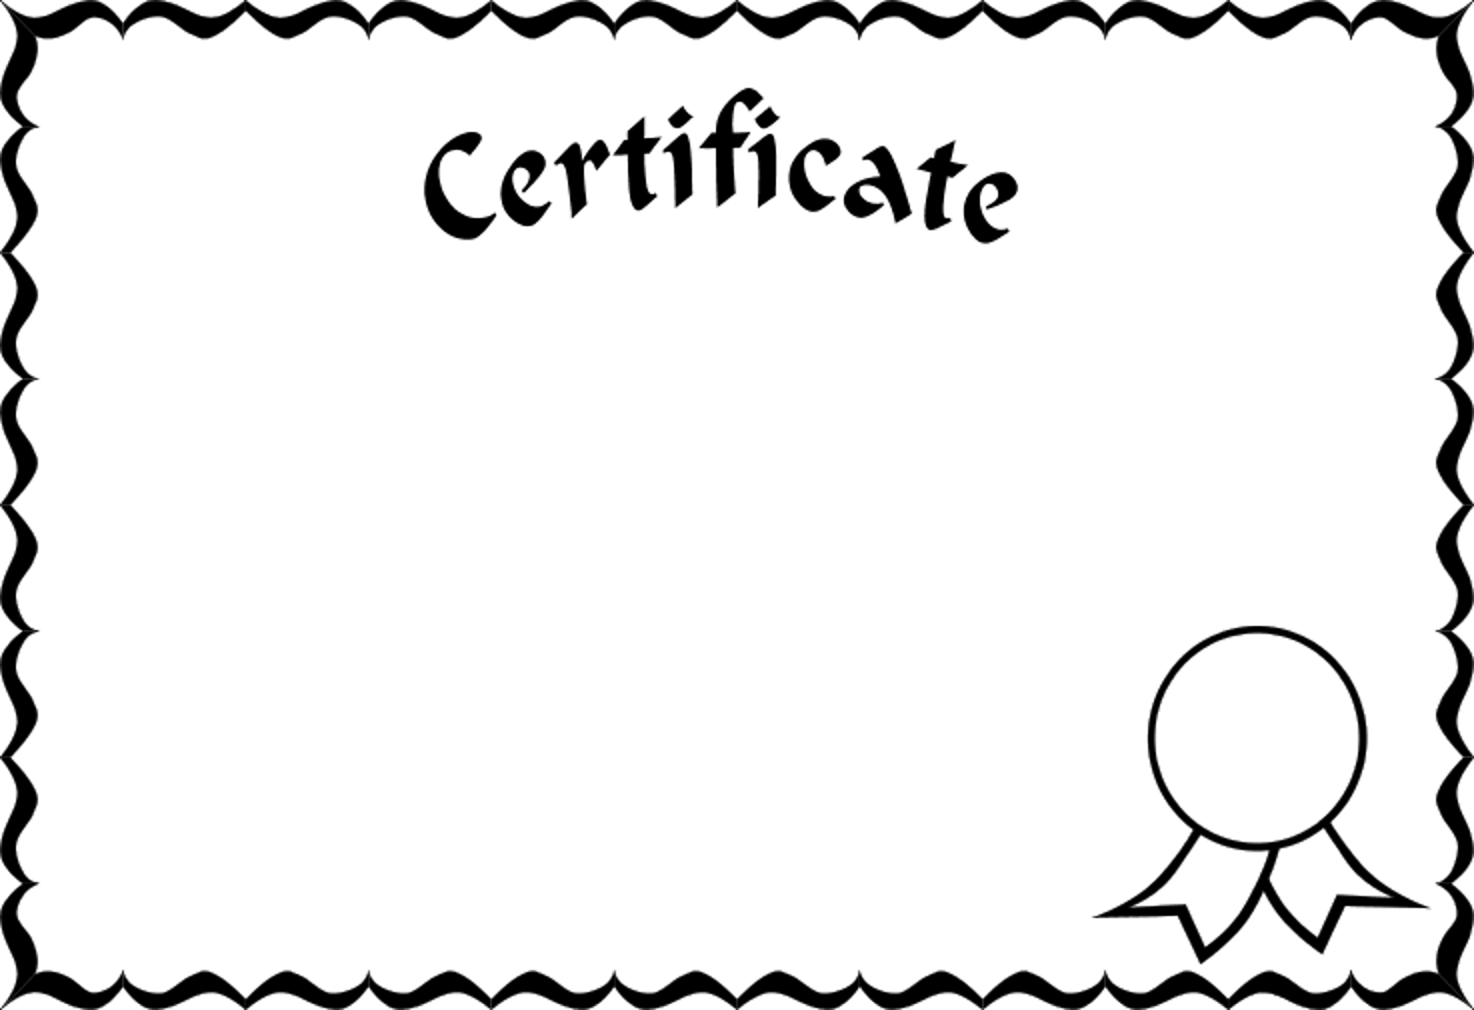 Certificate Borders And Frames (1474x1010)